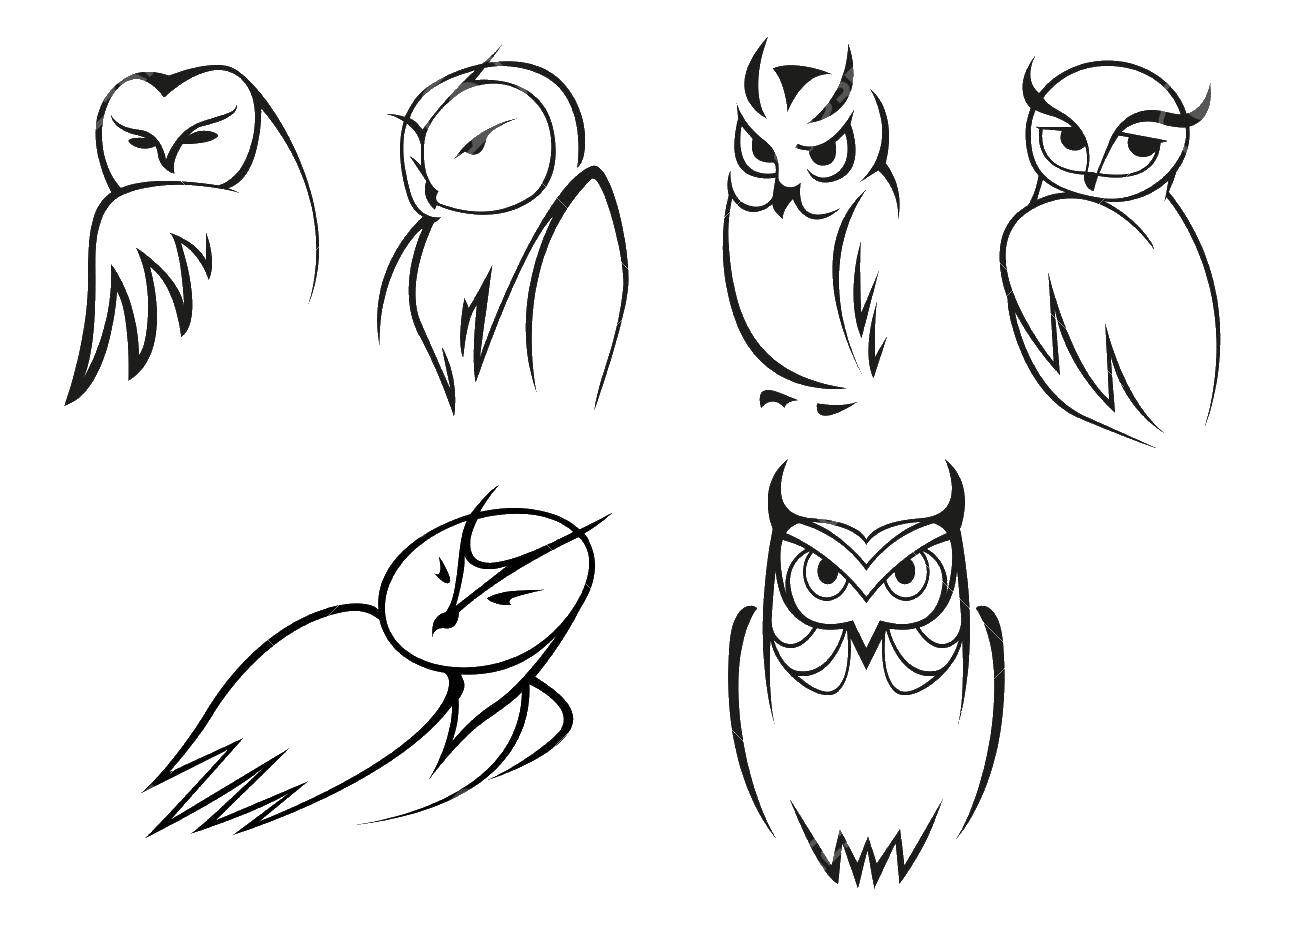 Coloring Owls. Category birds. Tags:  owls.